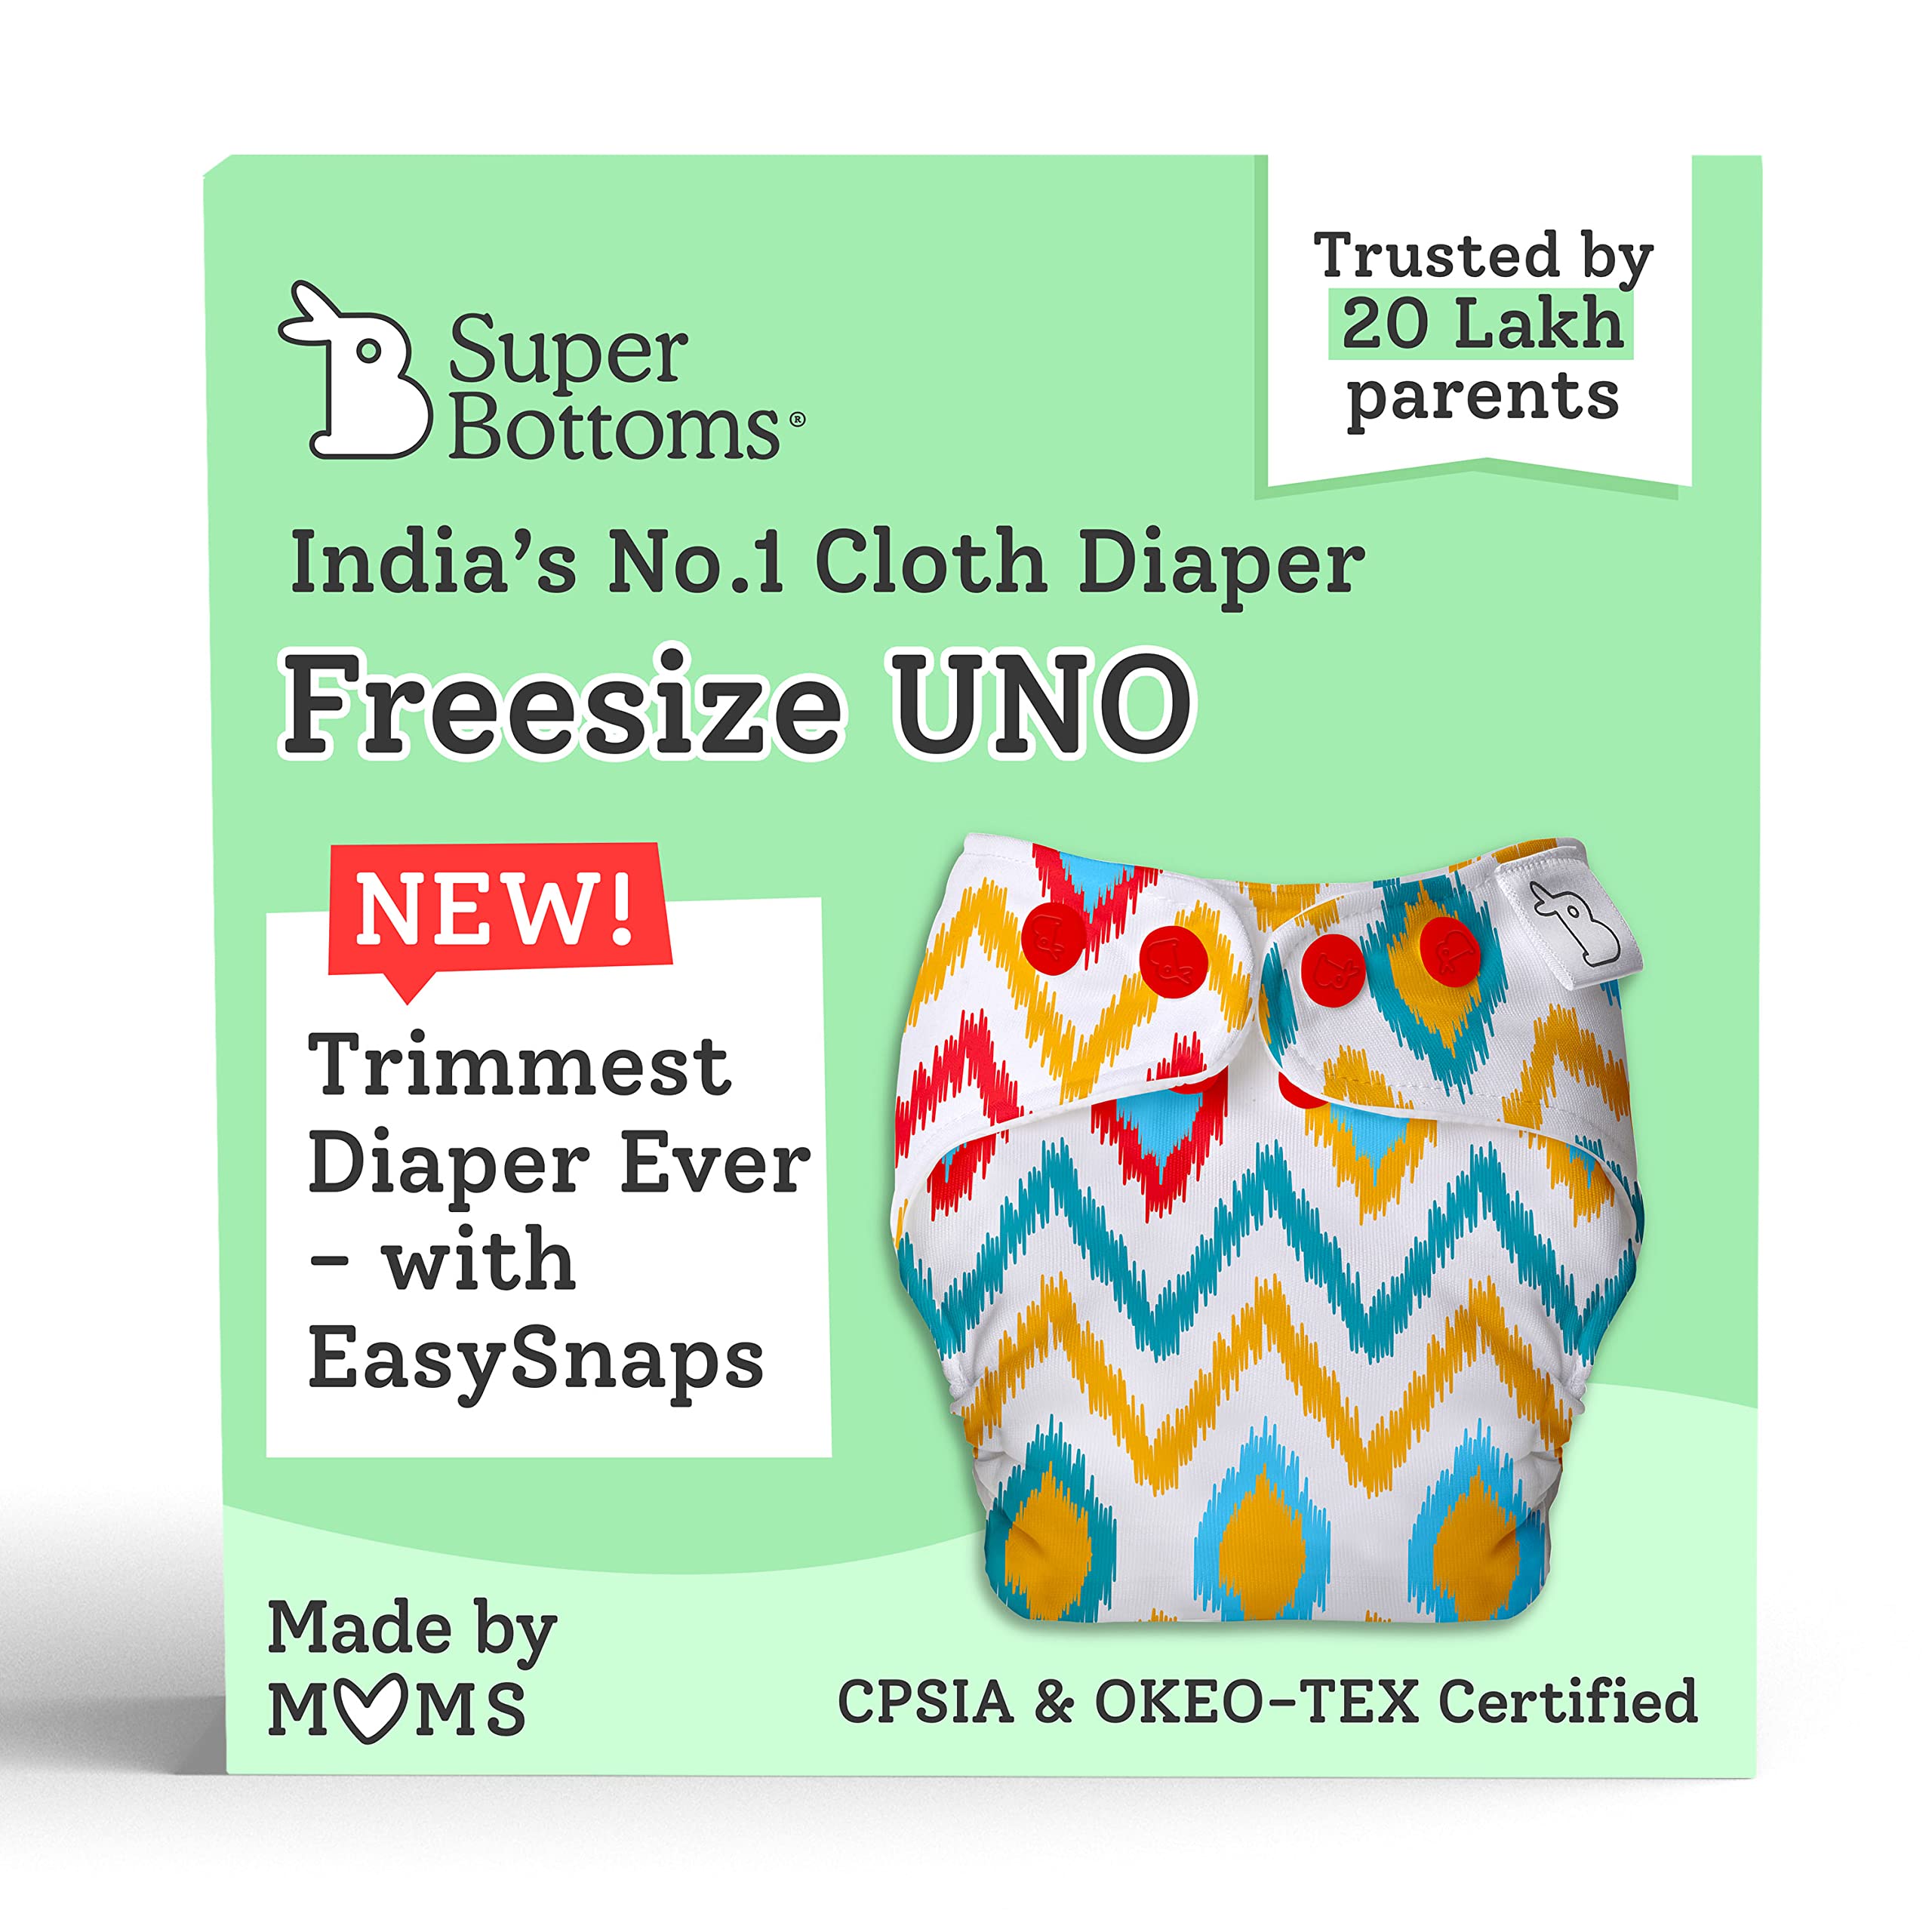 SuperBottoms New UNO Freesize Cloth Diaper, Cloth Diaper for Babies 0 to 3 Years, Washable & Reusable Cloth Diaper, Comes with Cloth Diaper Insert, 1 Diaper and 1 Organic Cotton Soaker